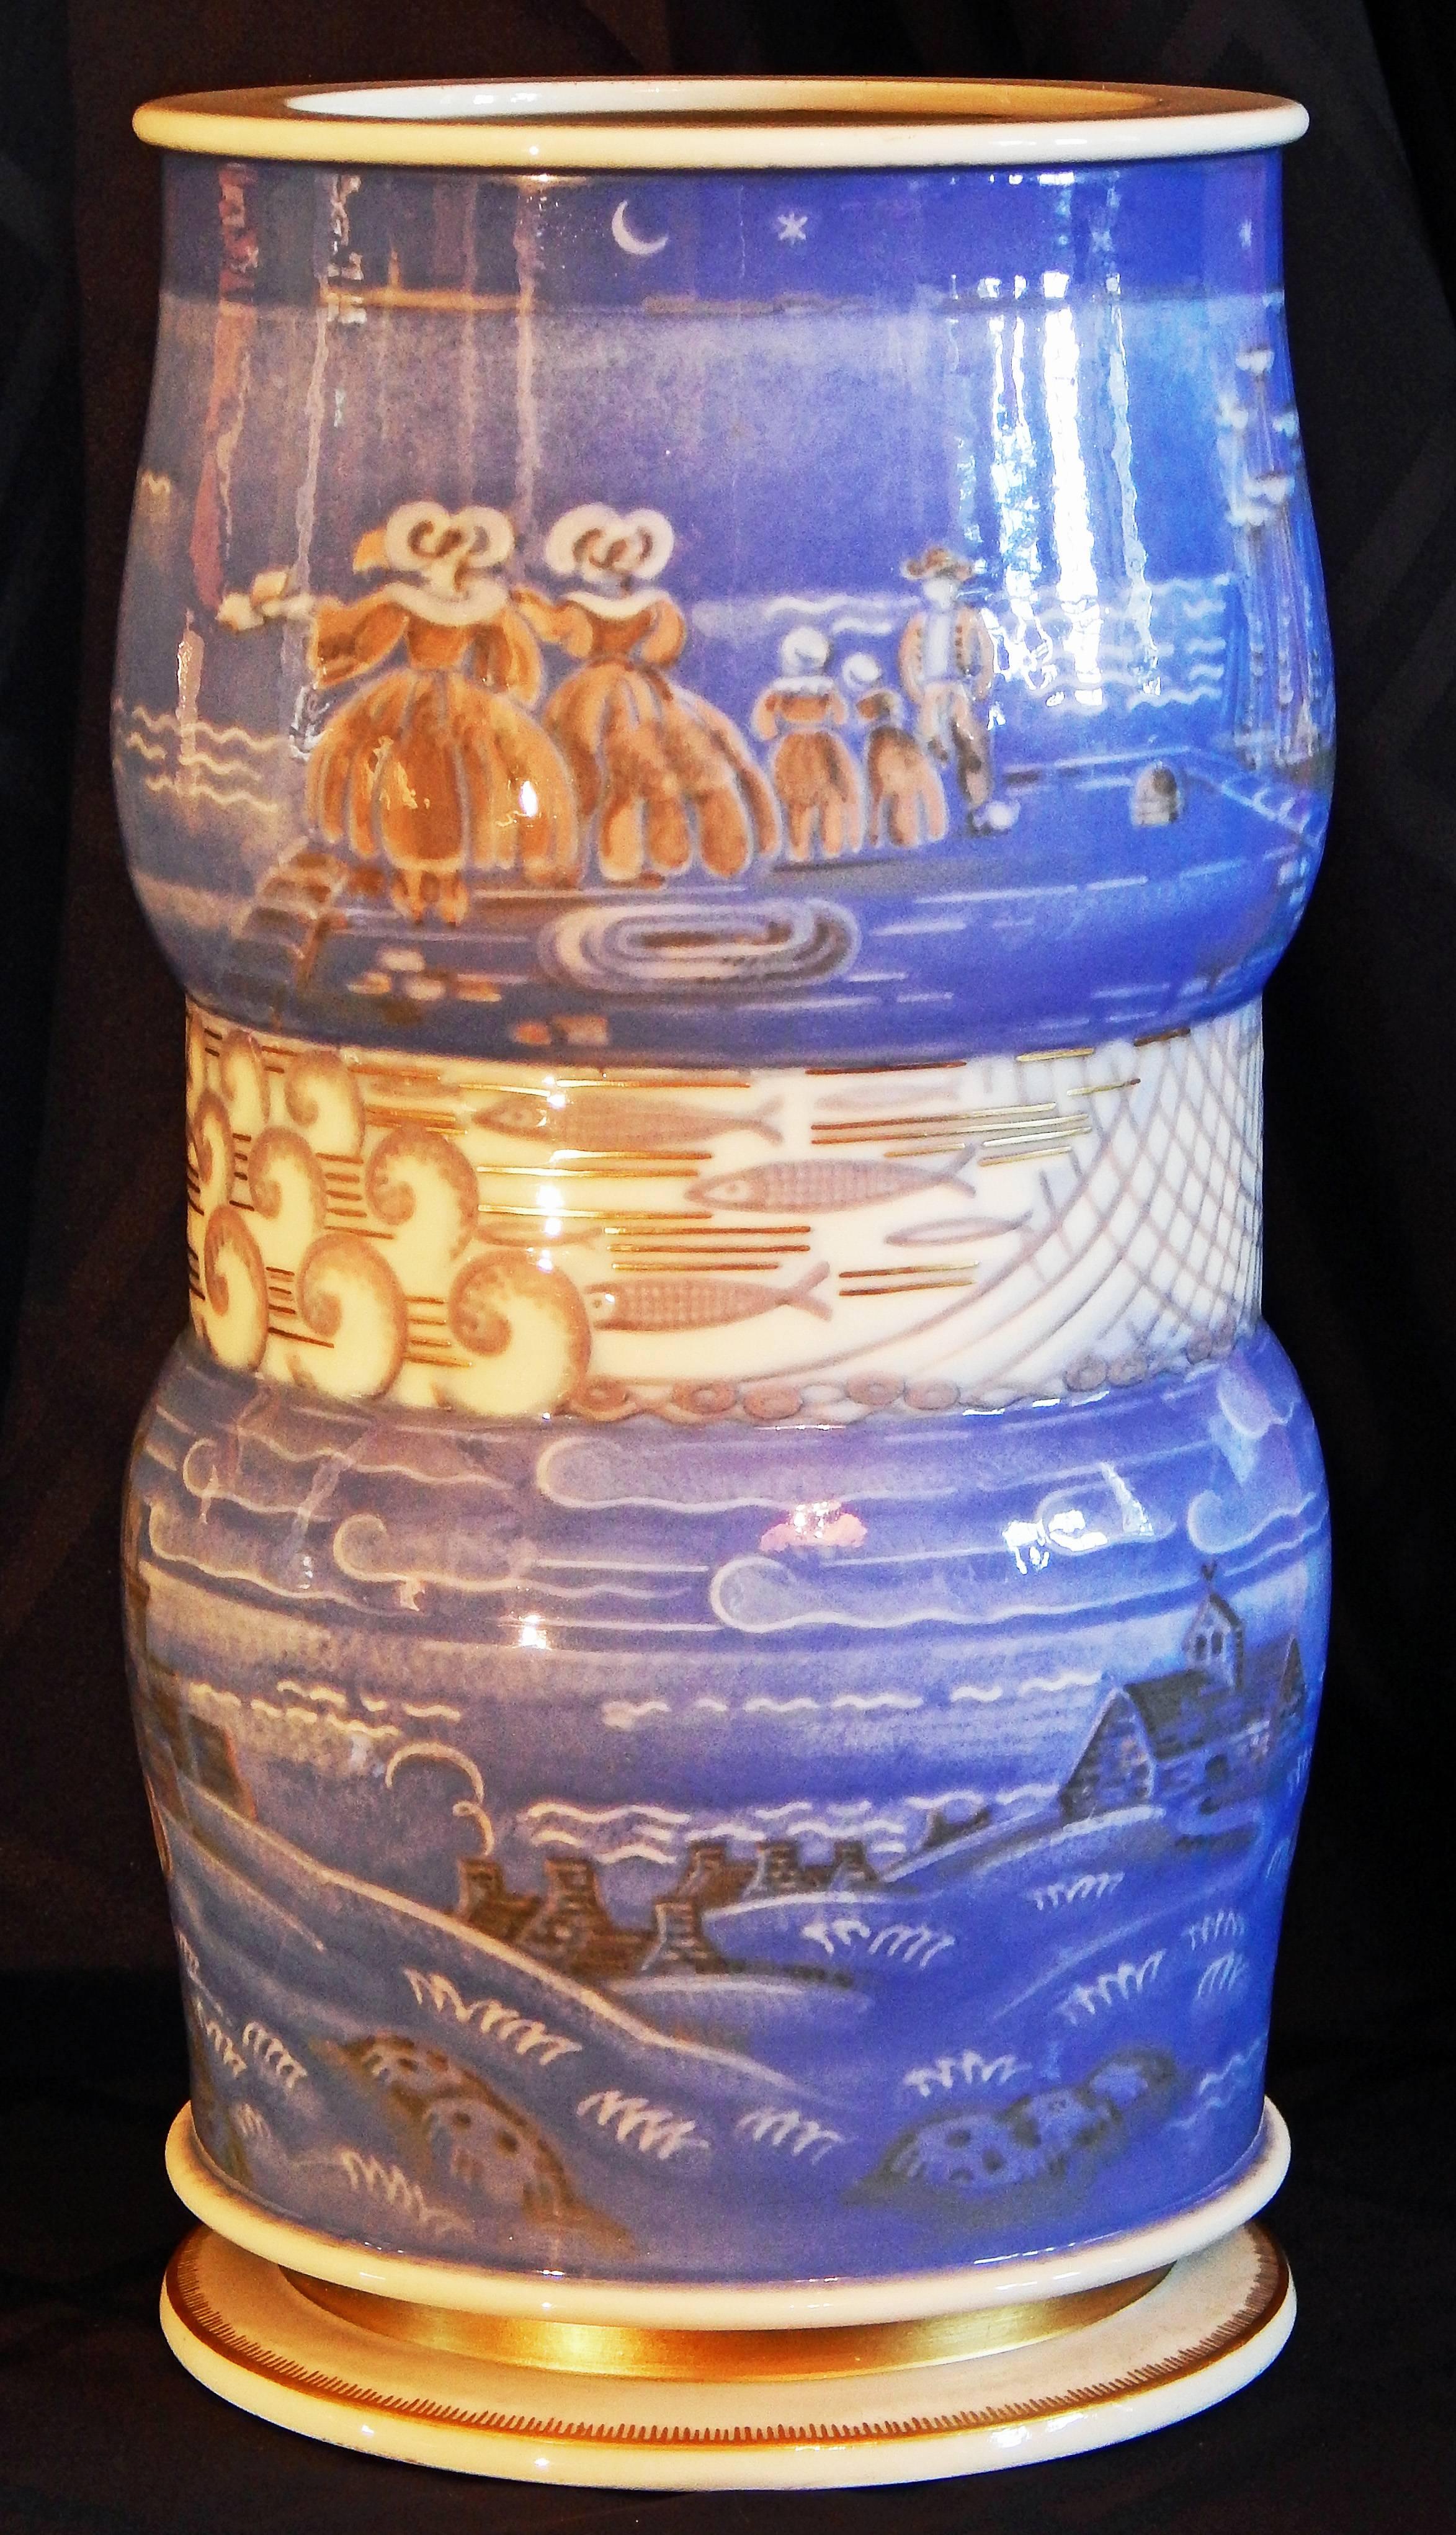 One of the finest pieces of Art Deco porcelain we have ever seen, and probably the greatest work ever executed by Adrien Leduc for Sevres, this large double-gourd vase depicts in great detail scenes from the life of a Breton village along the sea.